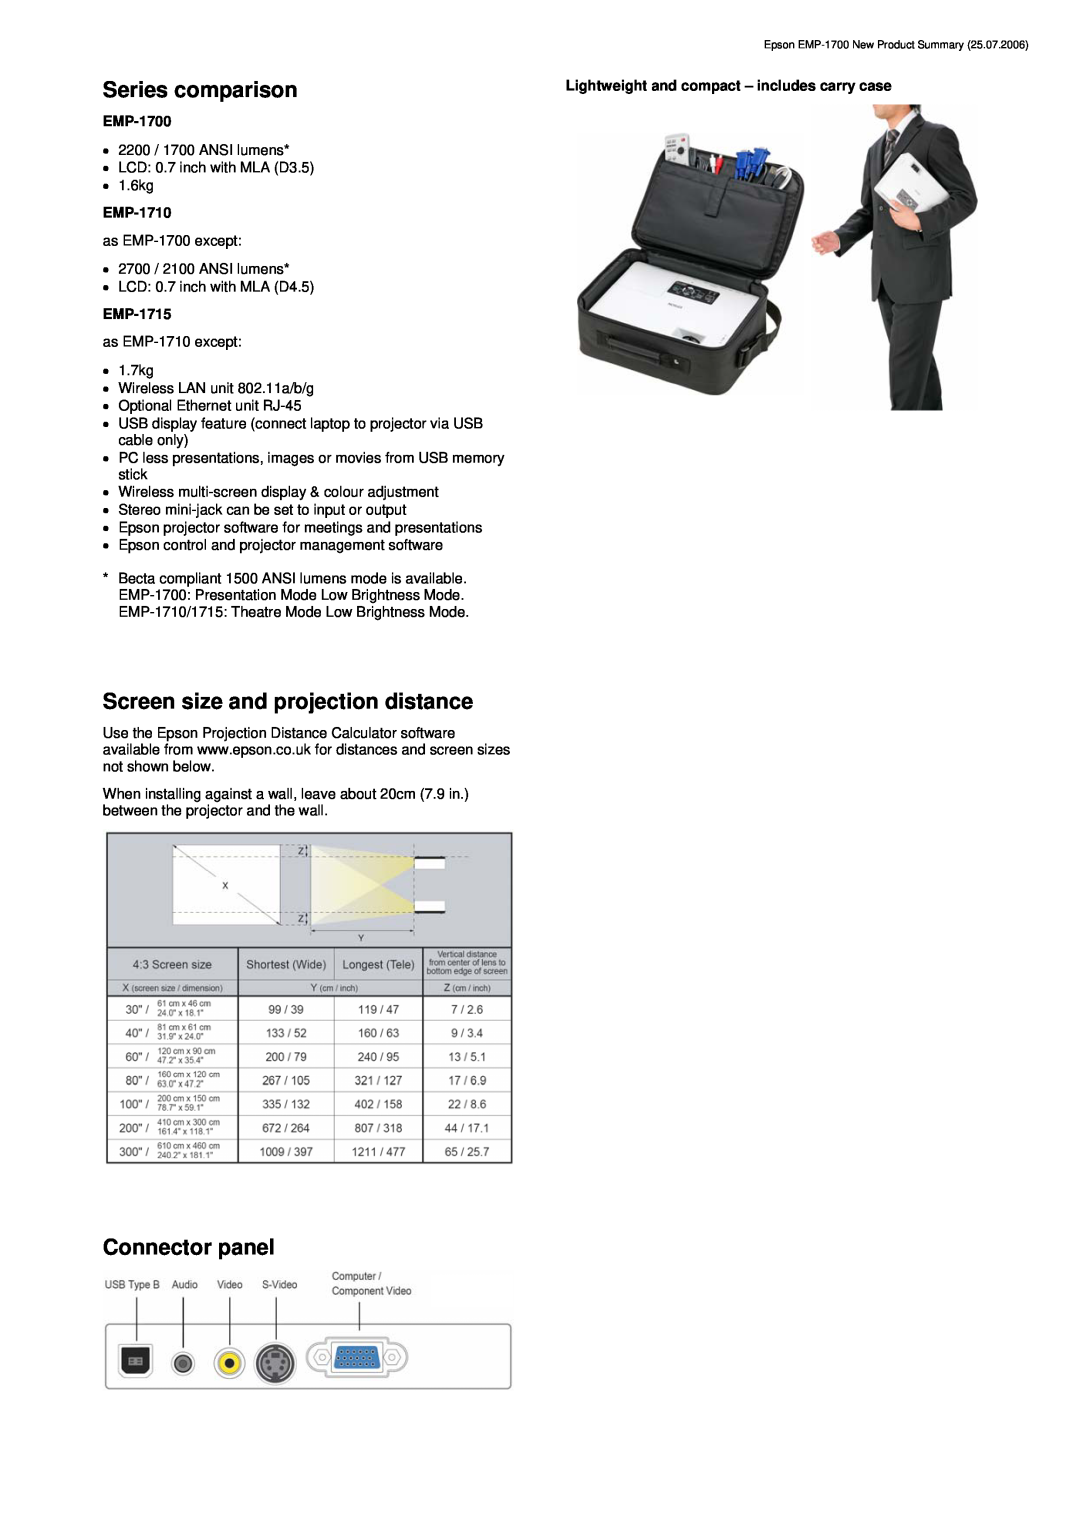 Epson EMP-1700 warranty Series comparison, Screen size and projection distance, Connector panel, EMP-1710, EMP-1715 